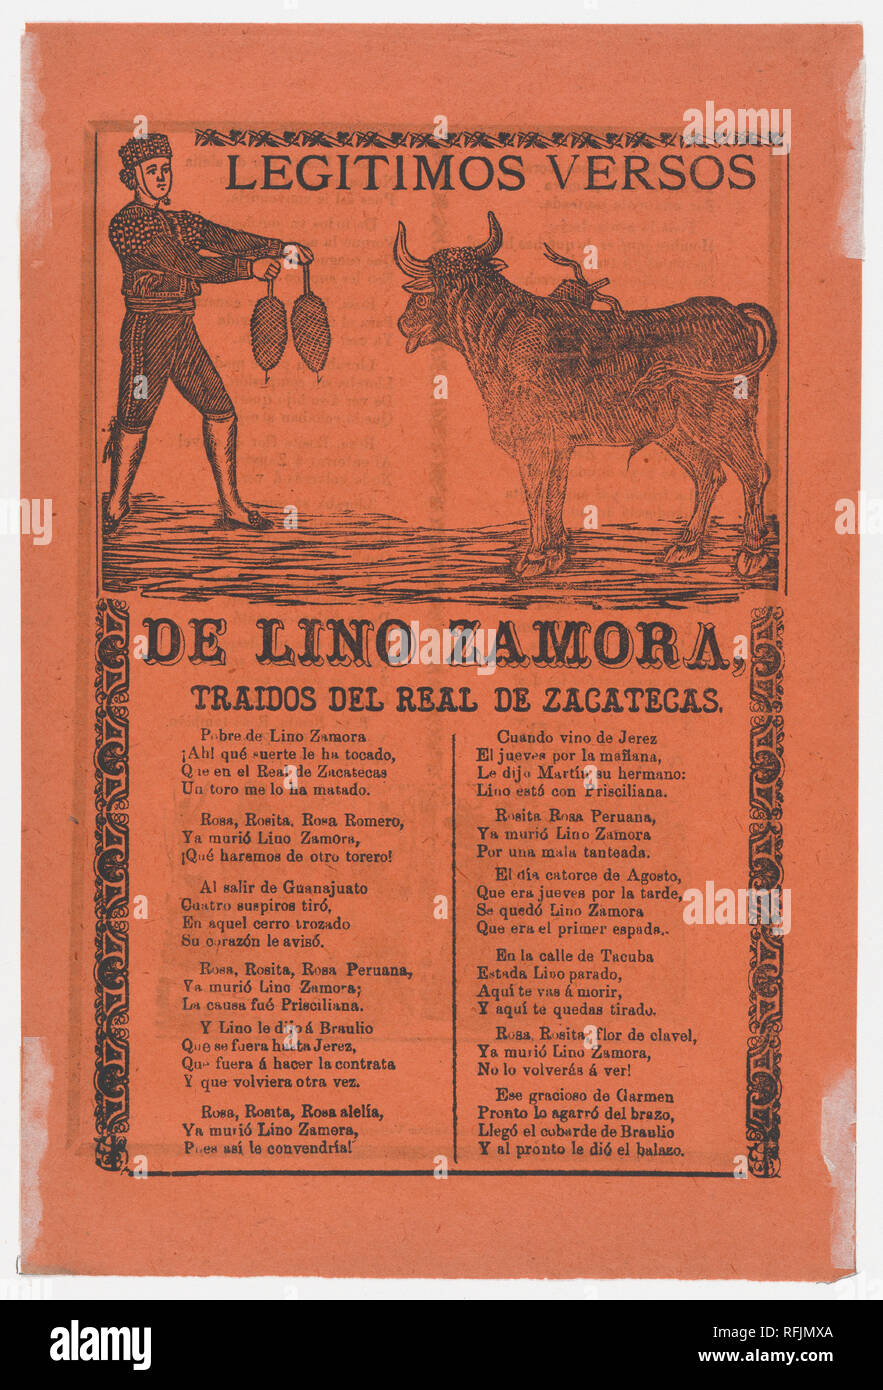 Broadside containing on recto, the legitimate verses of Lino Zamora brought from Real de Zacatecas (image of toreador and bull by Manilla) and a funeral scene on verso (?Posada). Artist: José Guadalupe Posada (Mexican, 1851-1913); Manuel Manilla (Mexican, Mexico City ca. 1830-1895 Mexico City). Dimensions: Sheet: 11 13/16 × 7 7/8 in. (30 × 20 cm). Printer: Antonio Vanegas Arroyo (1850-1917, Mexican). Date: 1902 (published). Museum: Metropolitan Museum of Art, New York, USA. Stock Photo